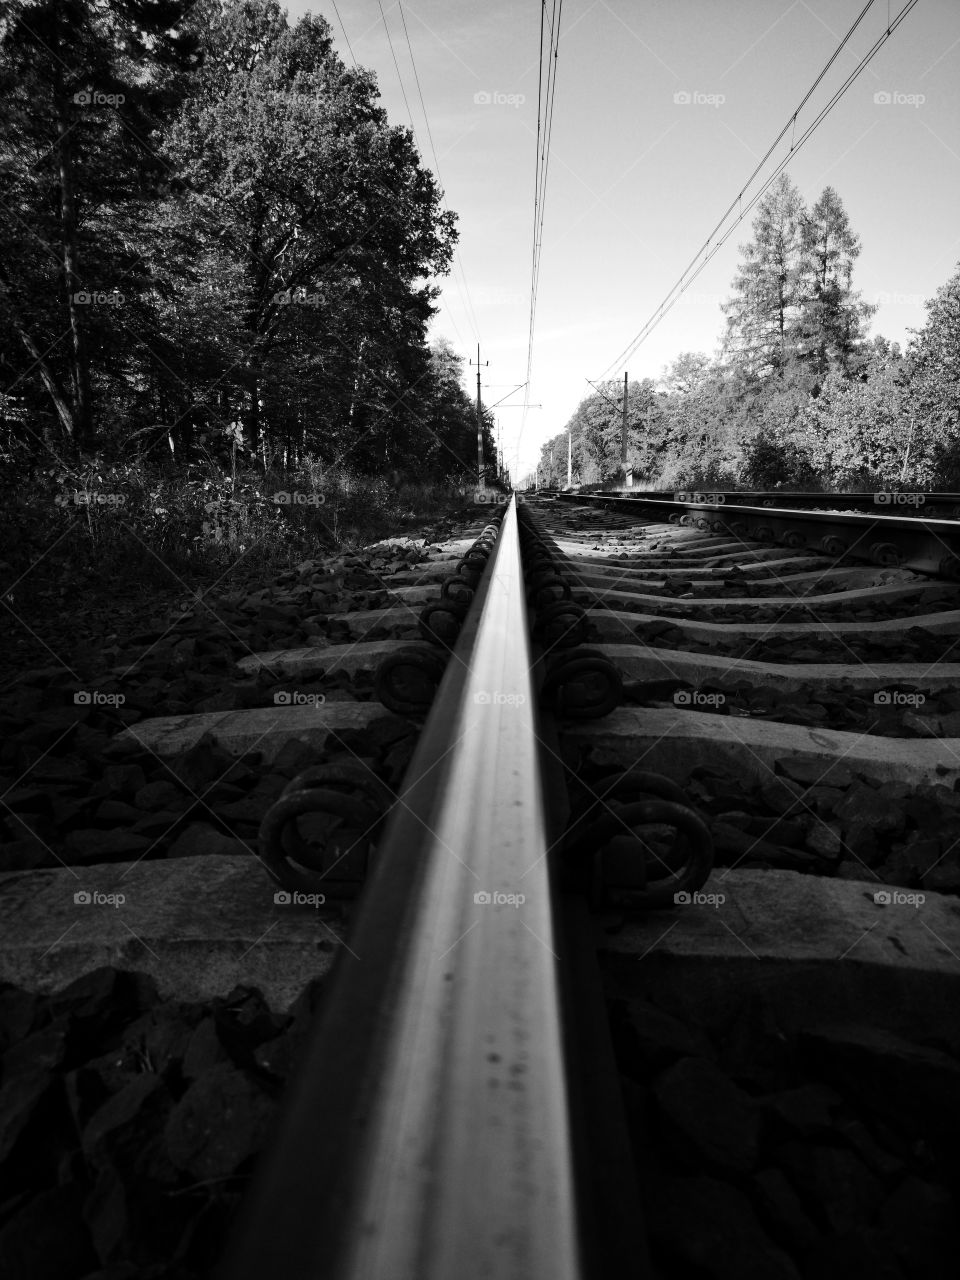 ... Sometimes you want to lie down on the tracks...